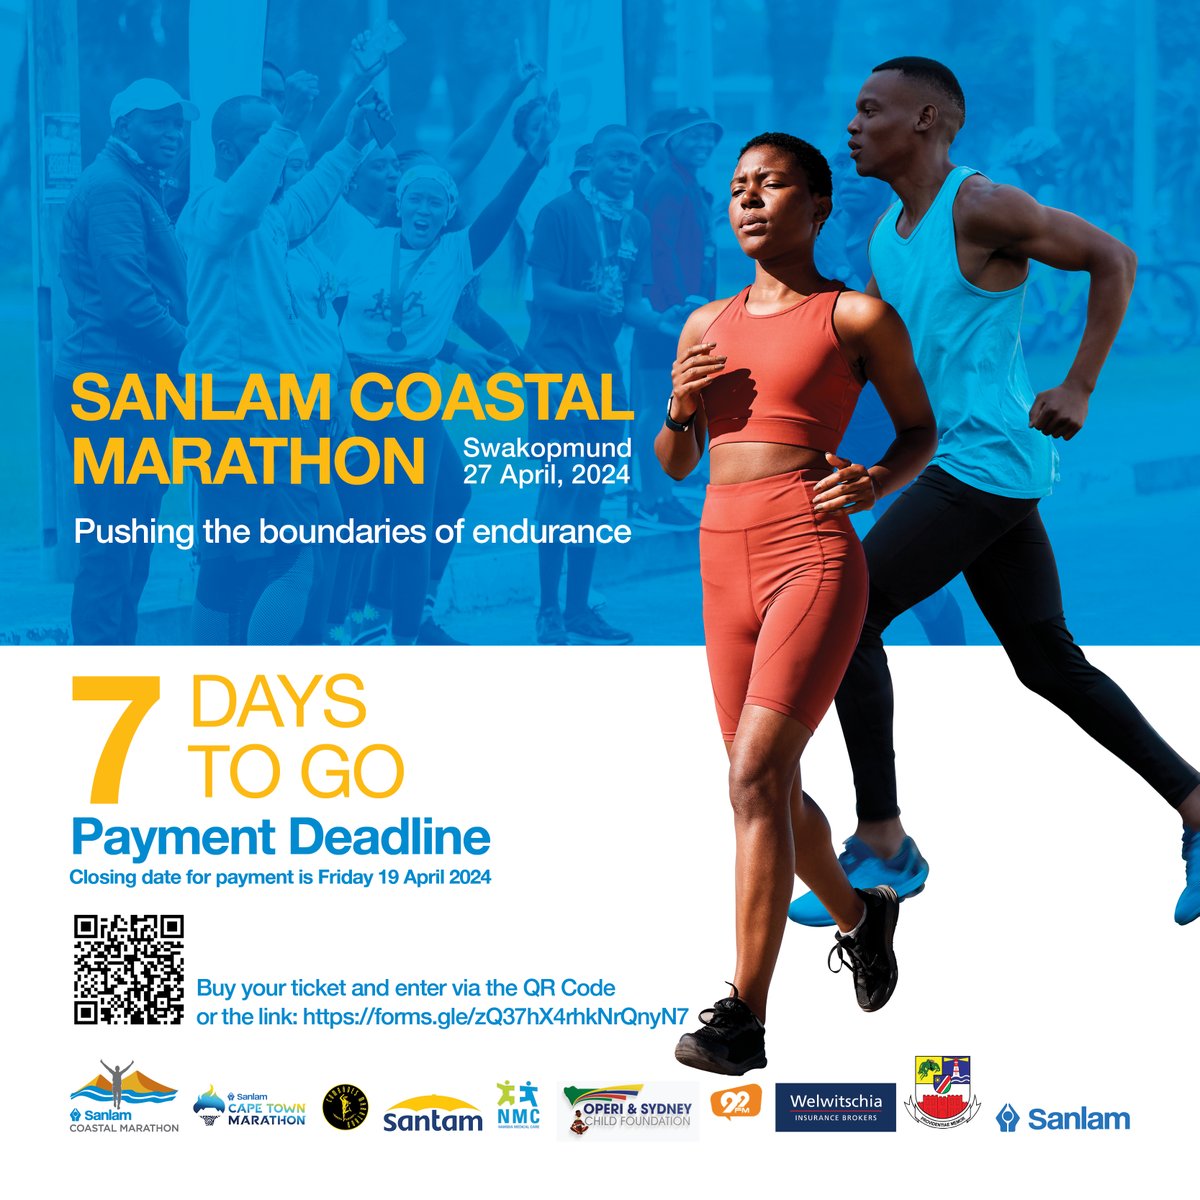 Tip 3: Stay Hydrated & Fuelled up With just 7 days left until the #SanlamCoastalMarathon, prioritise your hydration game. Proper hydration will help optimise your performance on race day. Share your hydration plan for a chance to win 1 of 10 running kits courtesy of Sanlam. 🏃‍♂️